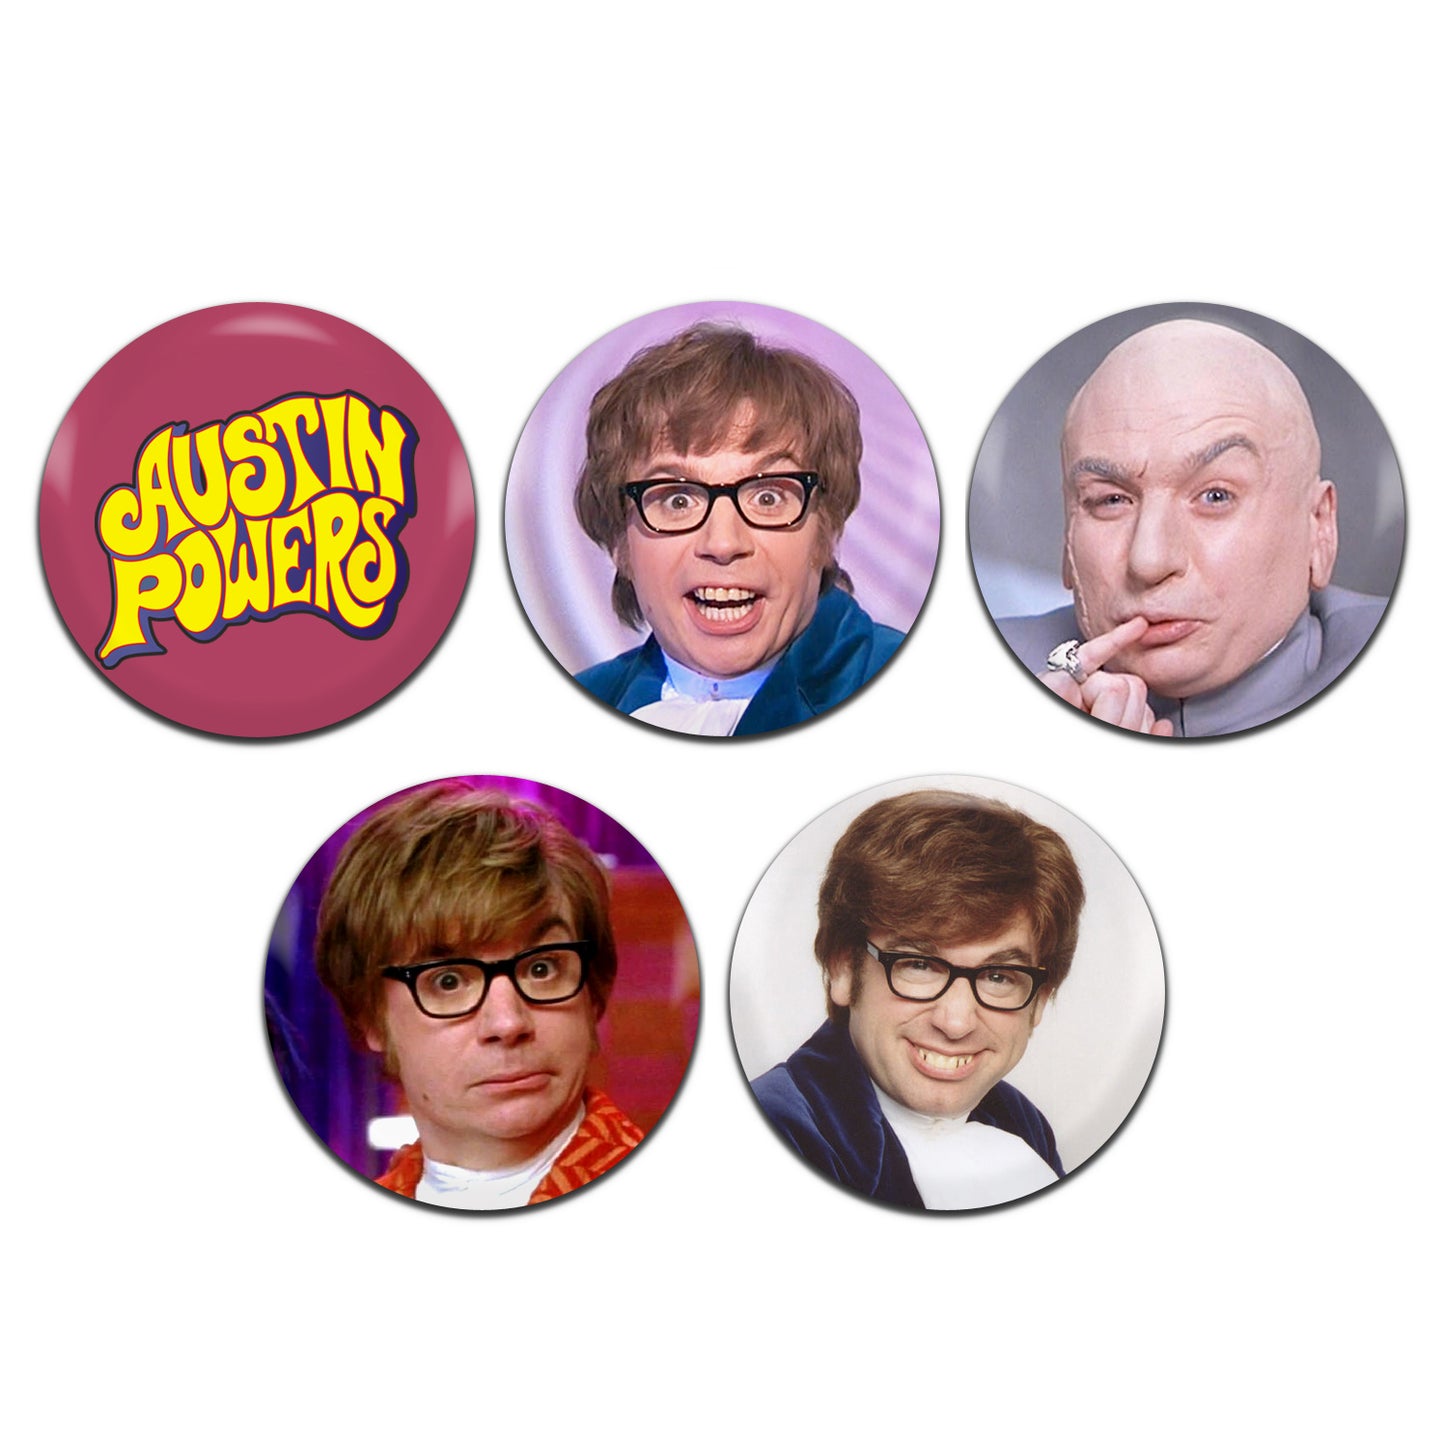 Austin Powers Movie Film Comedy 90's 25mm / 1 Inch D-Pin Button Badges (5x Set)